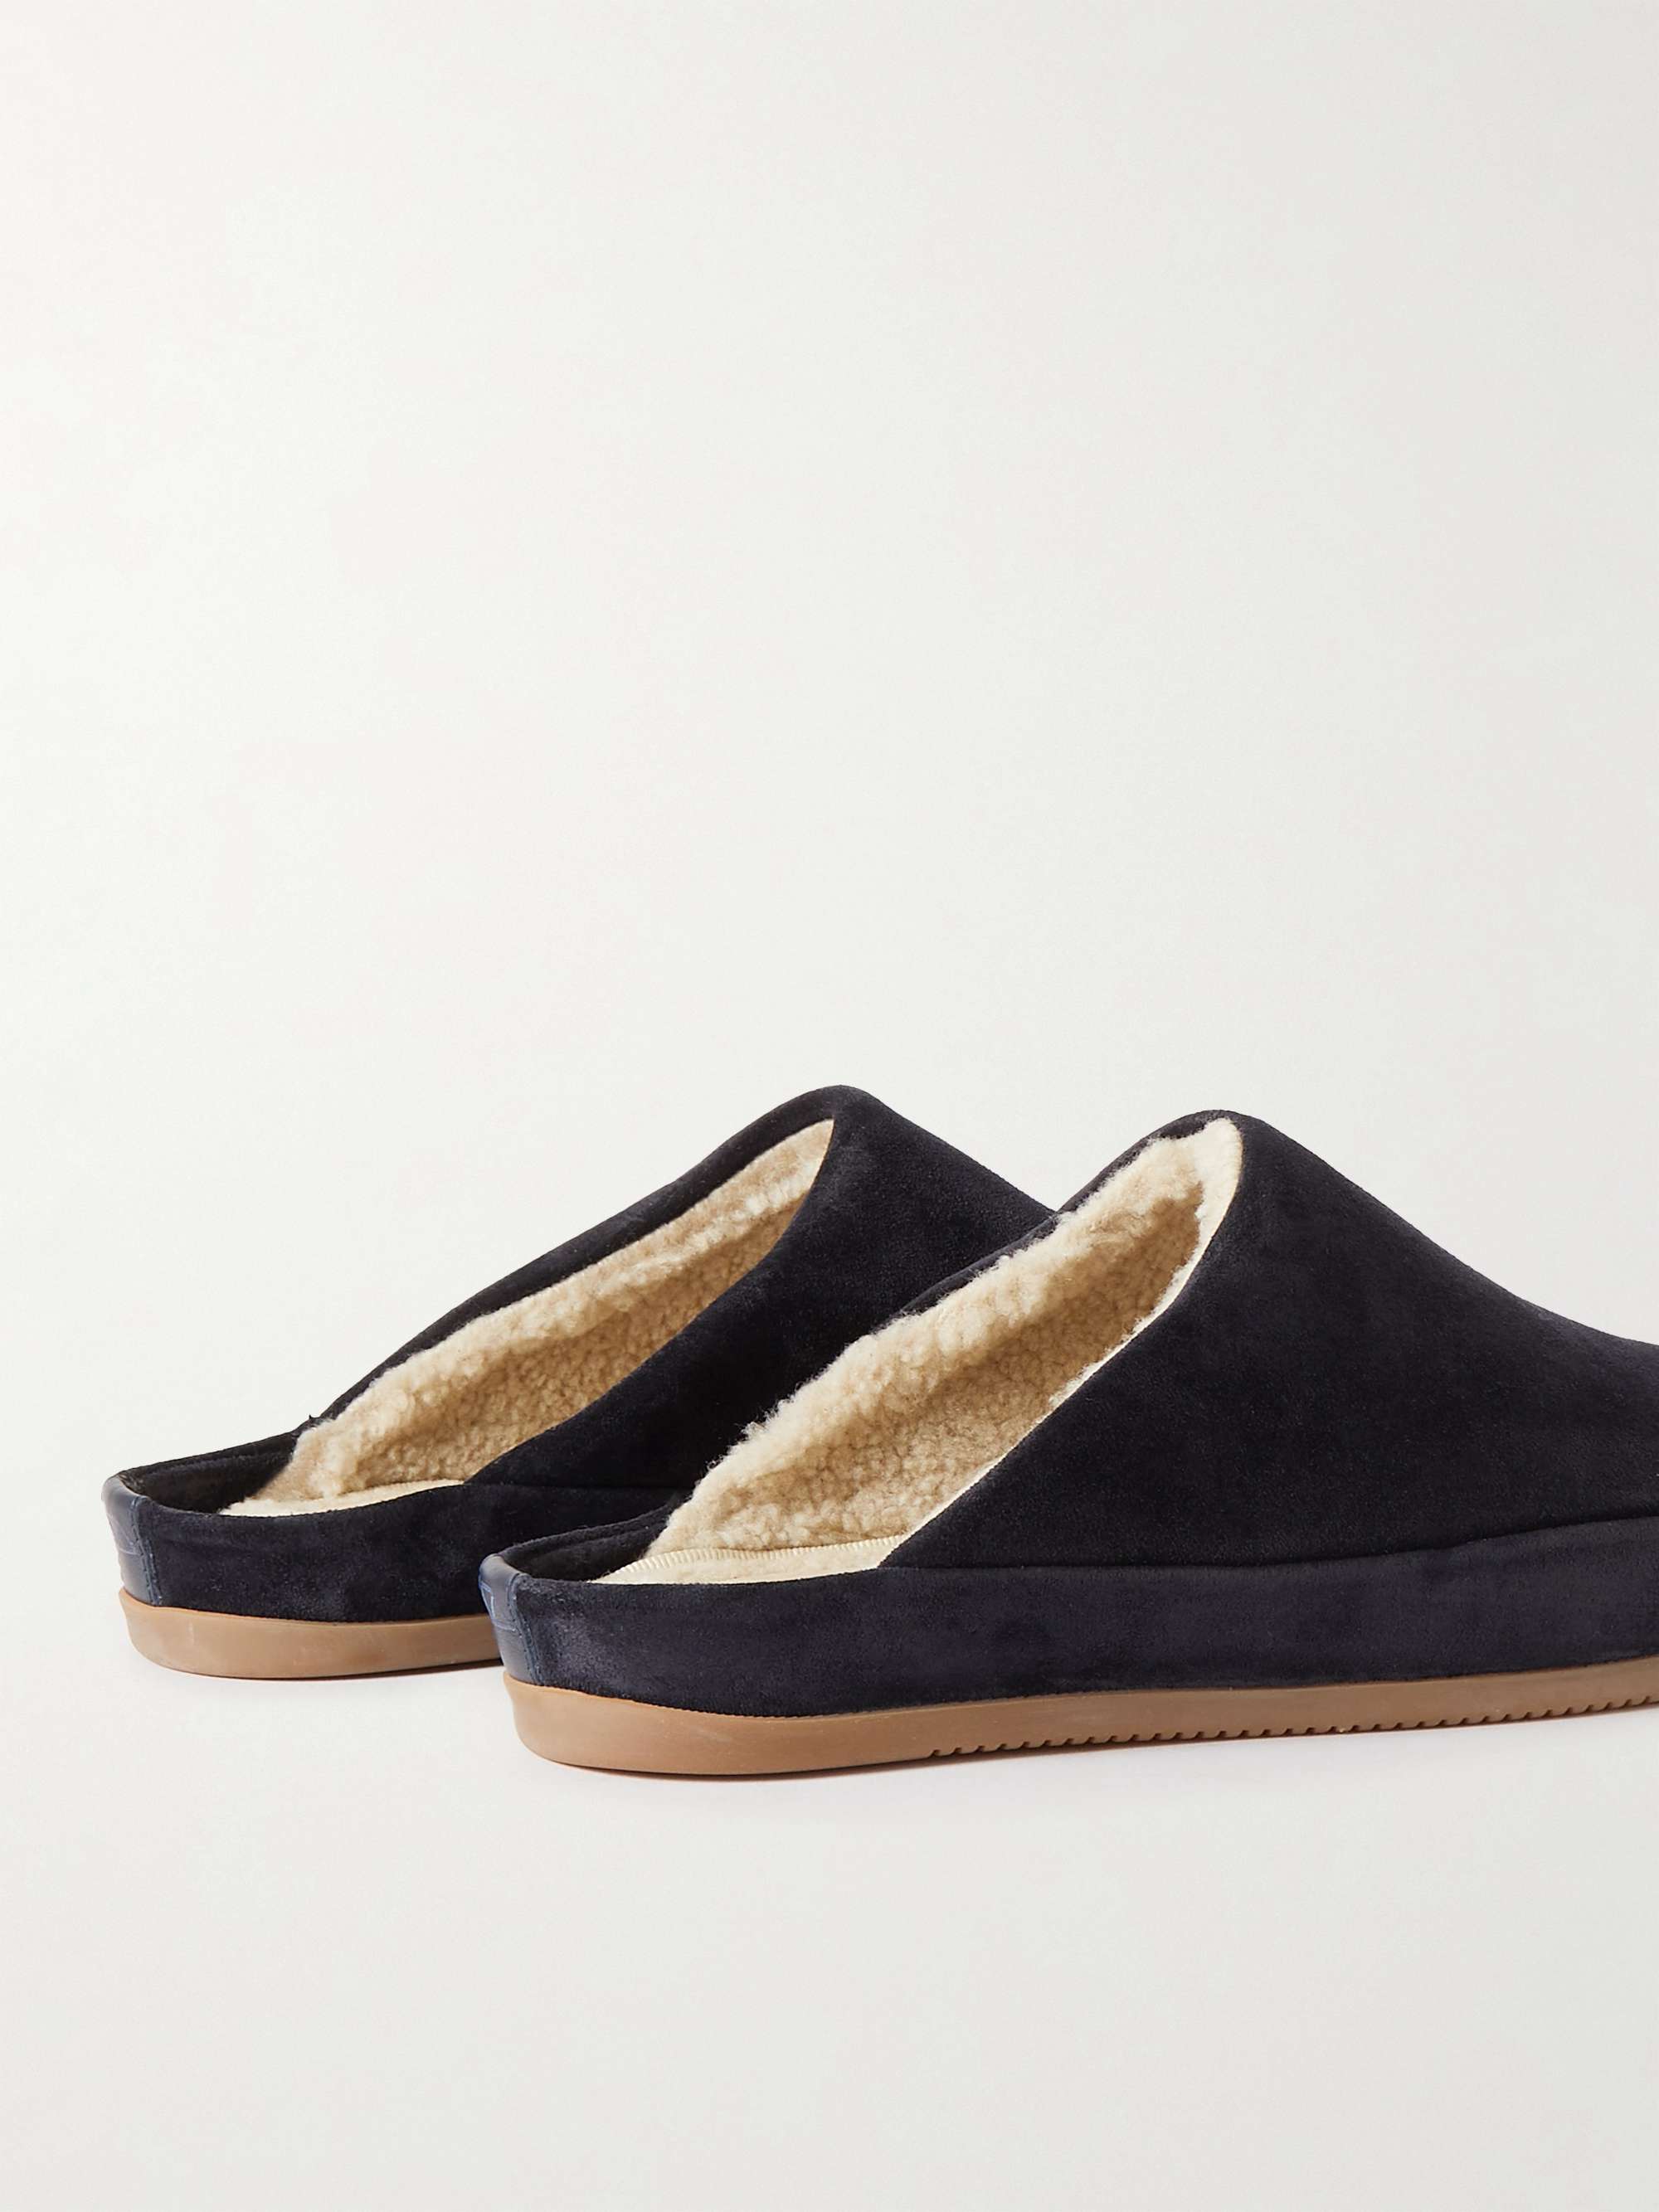 MULO Shearling-Lined Suede Slippers